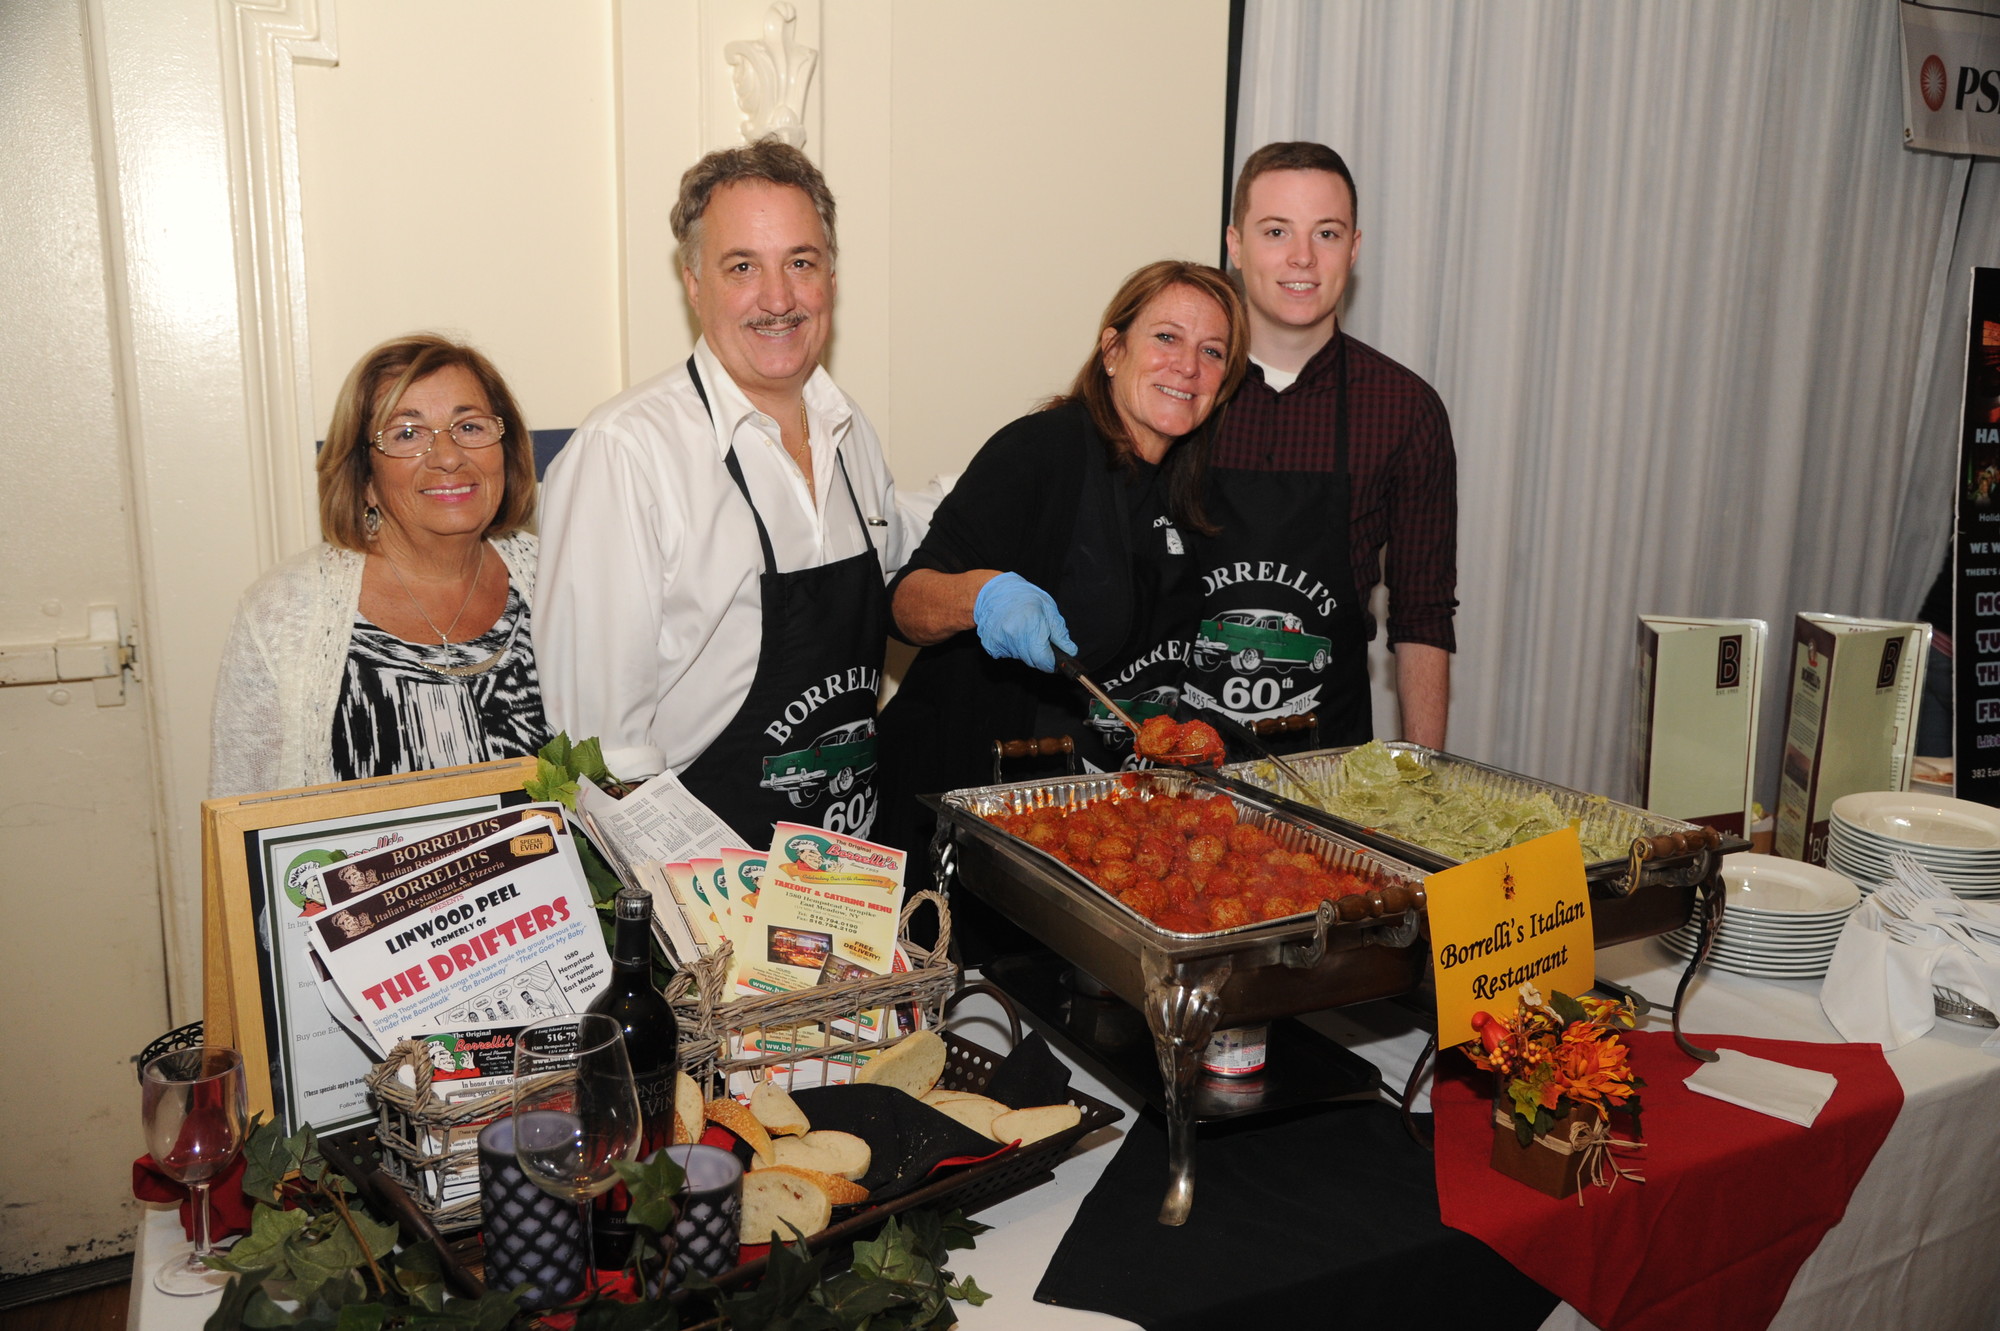 Borrelli’s Restaurant served Italian food at Culinary Delights on Monday. From left was Tina, Frank Jr., Beth and Frank III